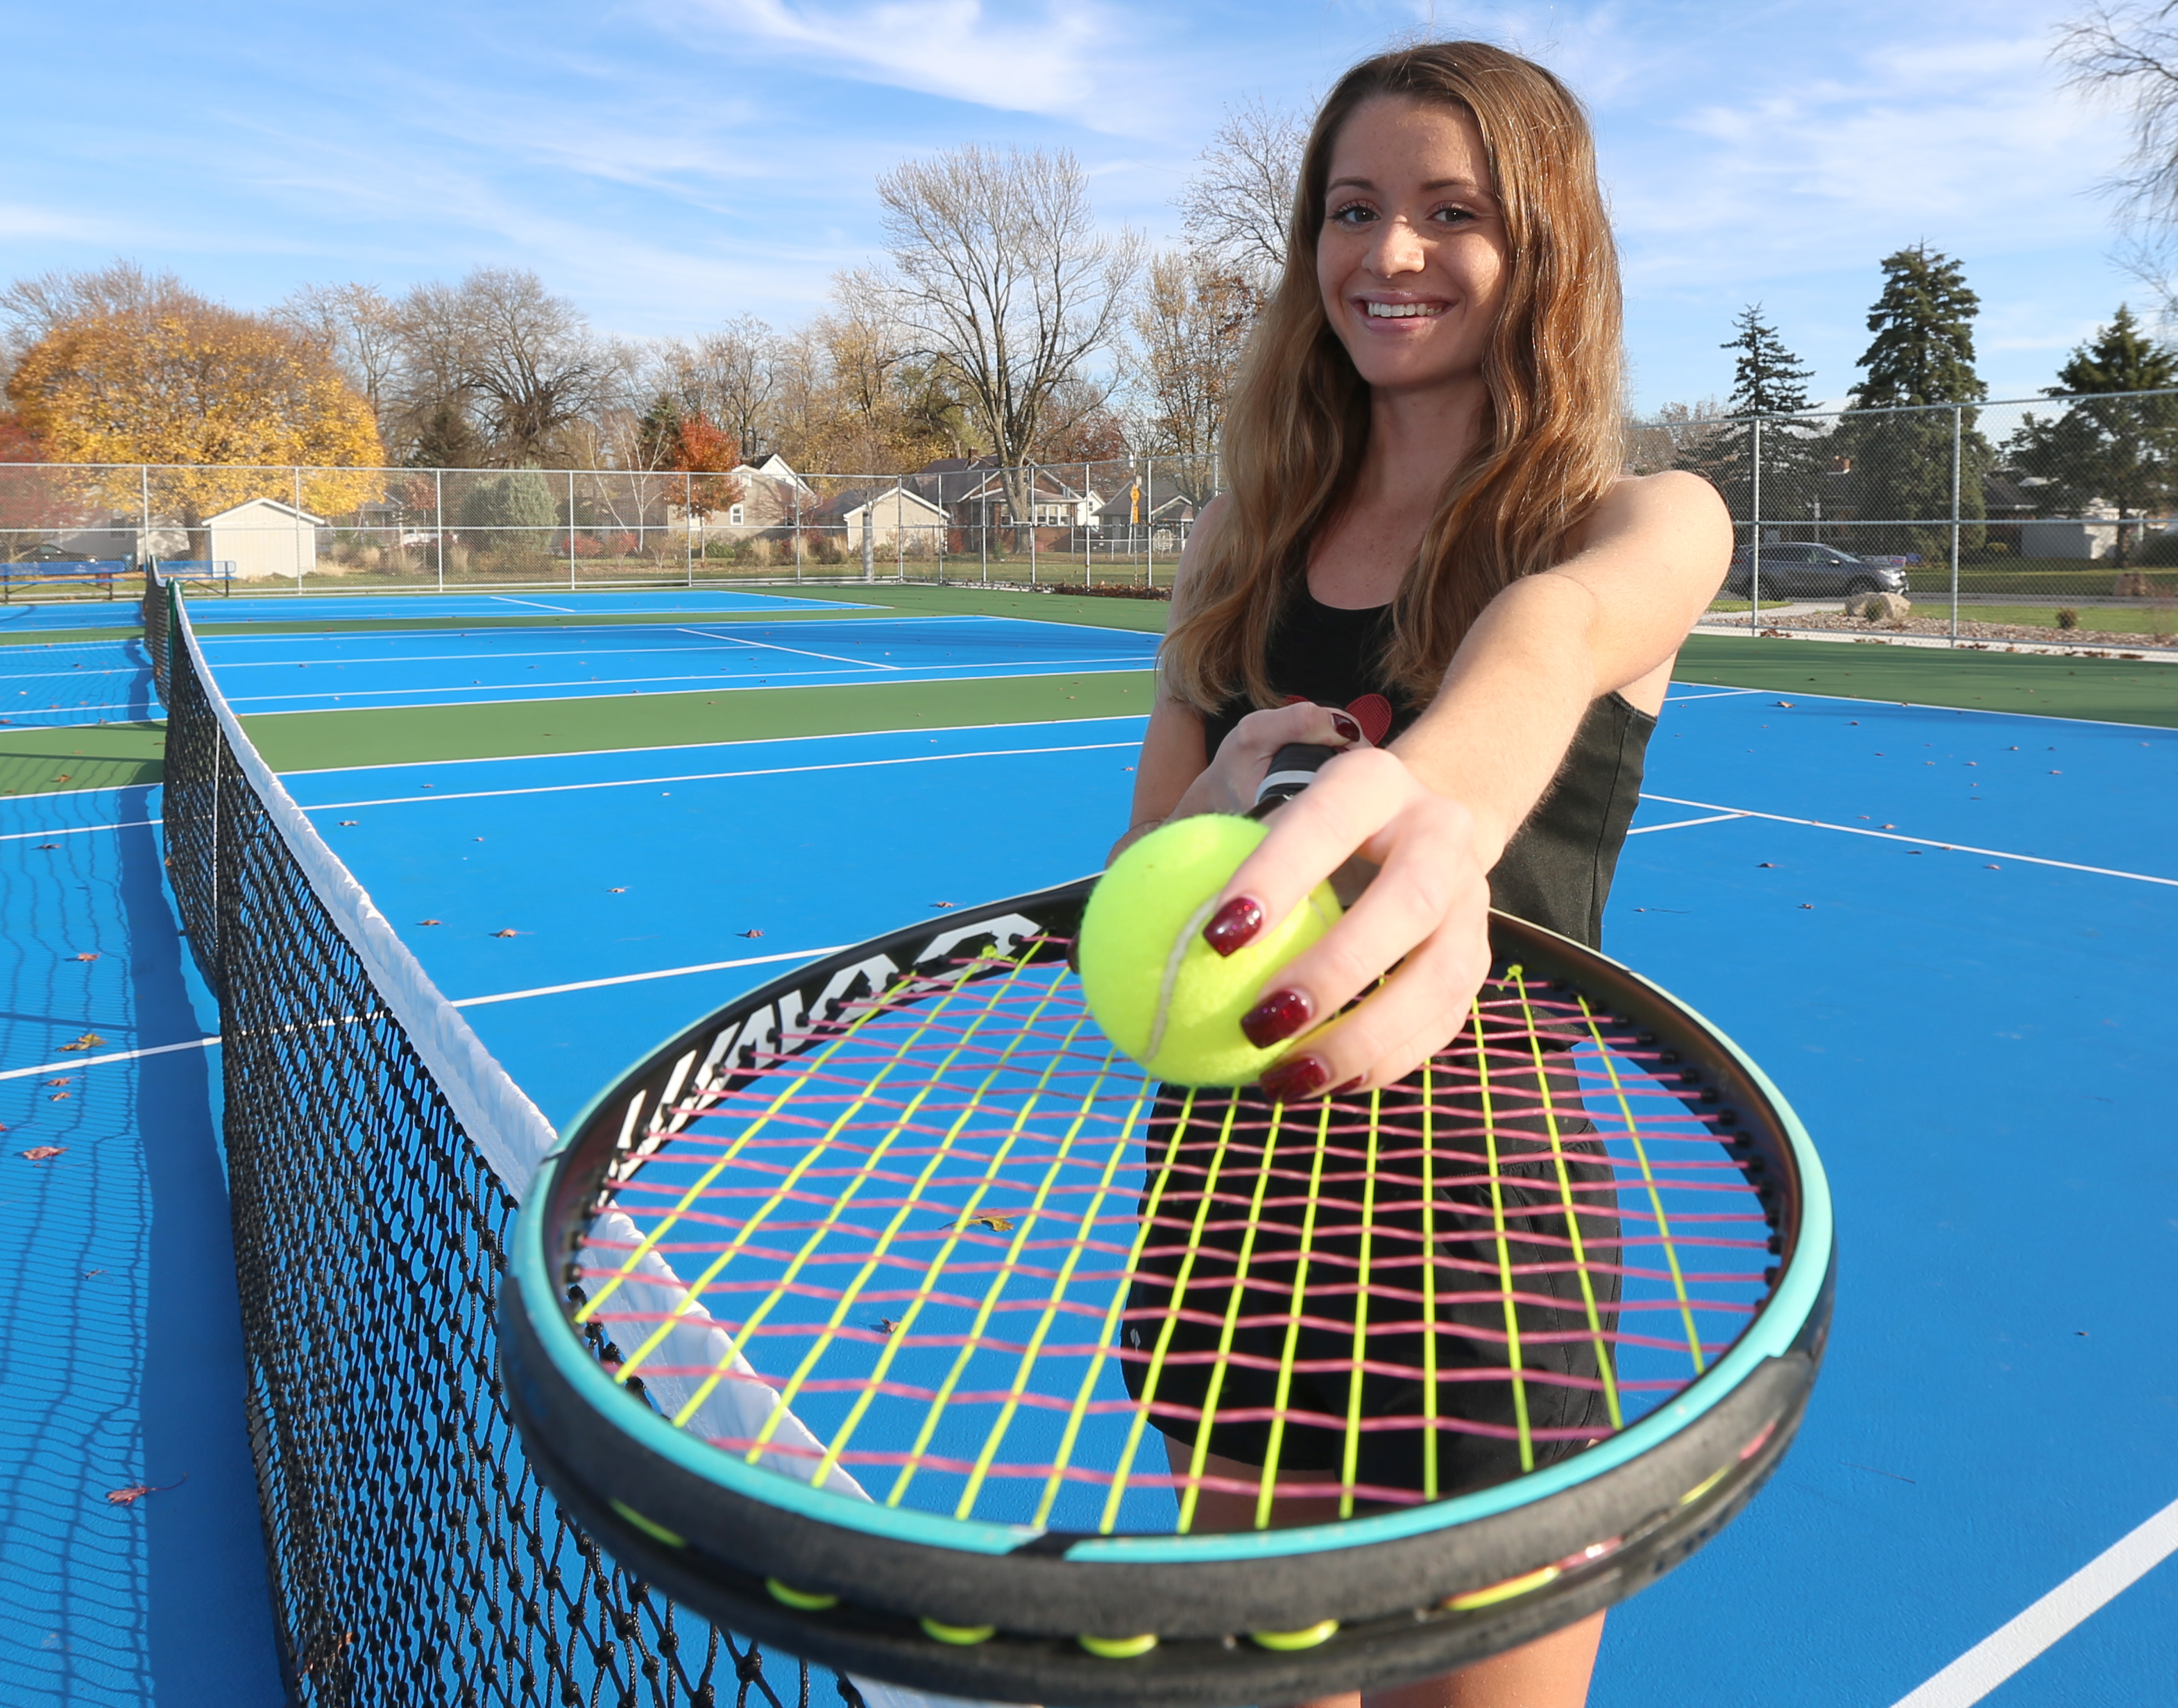 GIRLS TENNIS: Schroeder will play for Lewis and Clark